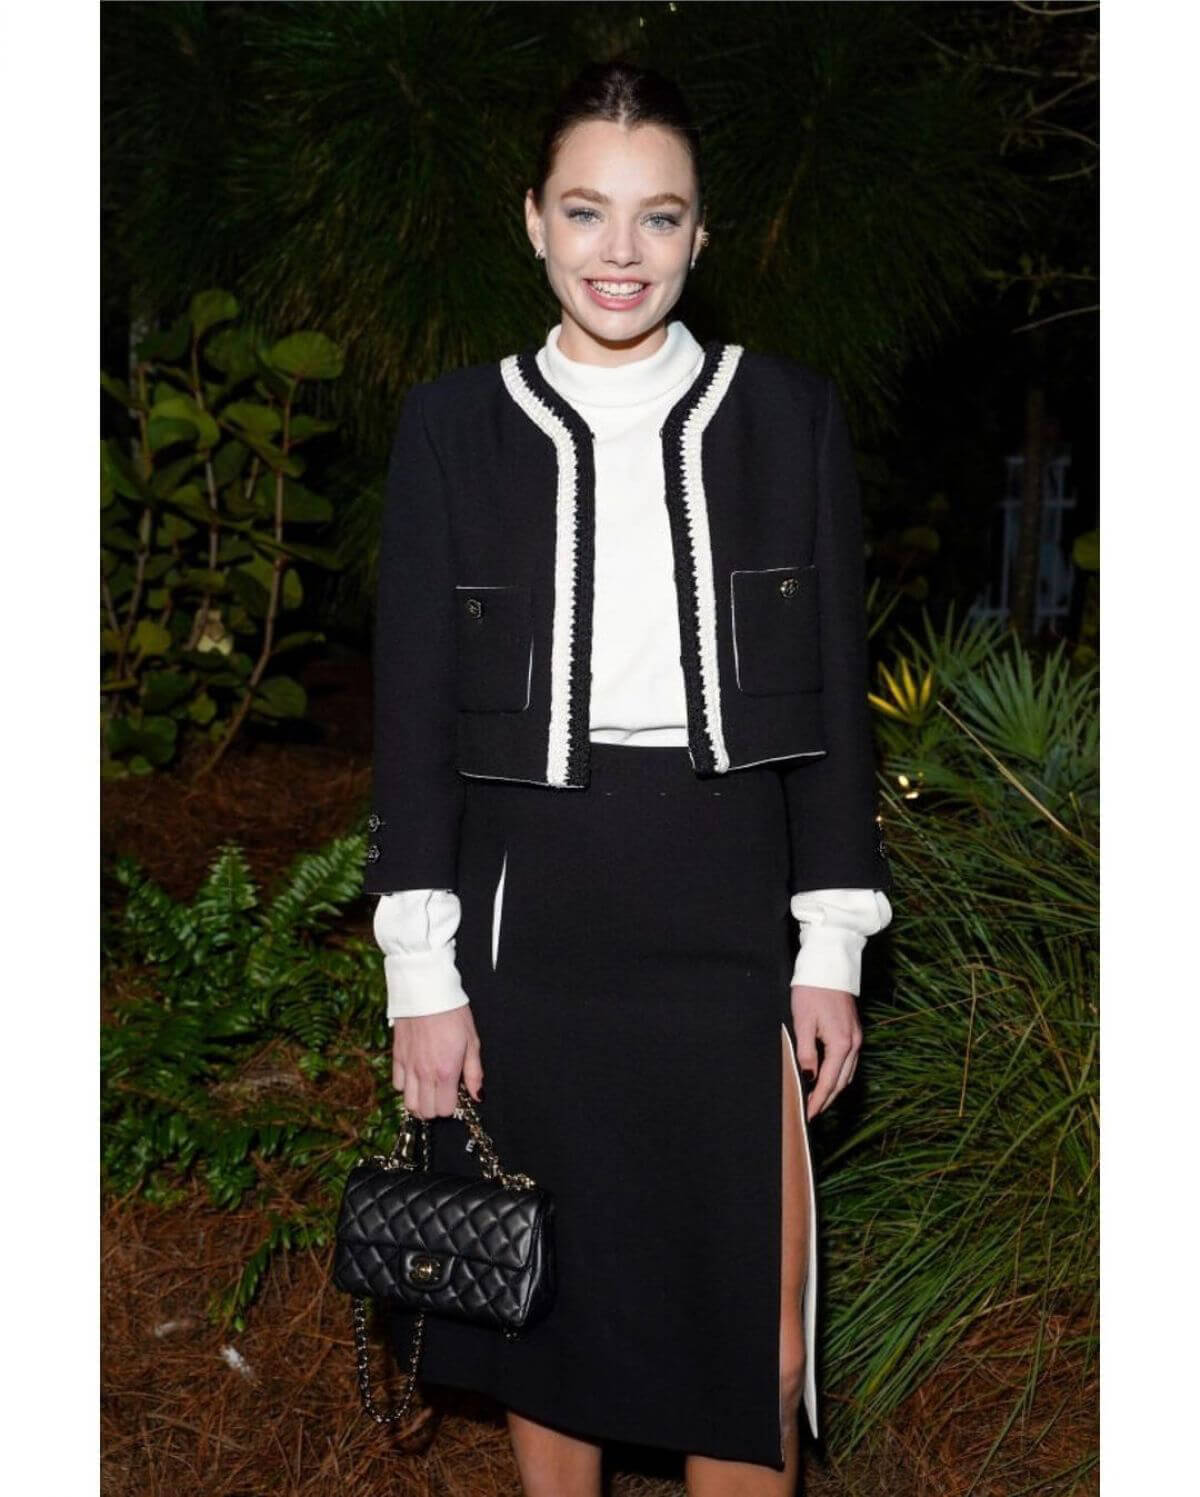 Kristine Froseth in Black and White Outfit at Chanel Dinner to Celebrate Five Echoes in Miami 4